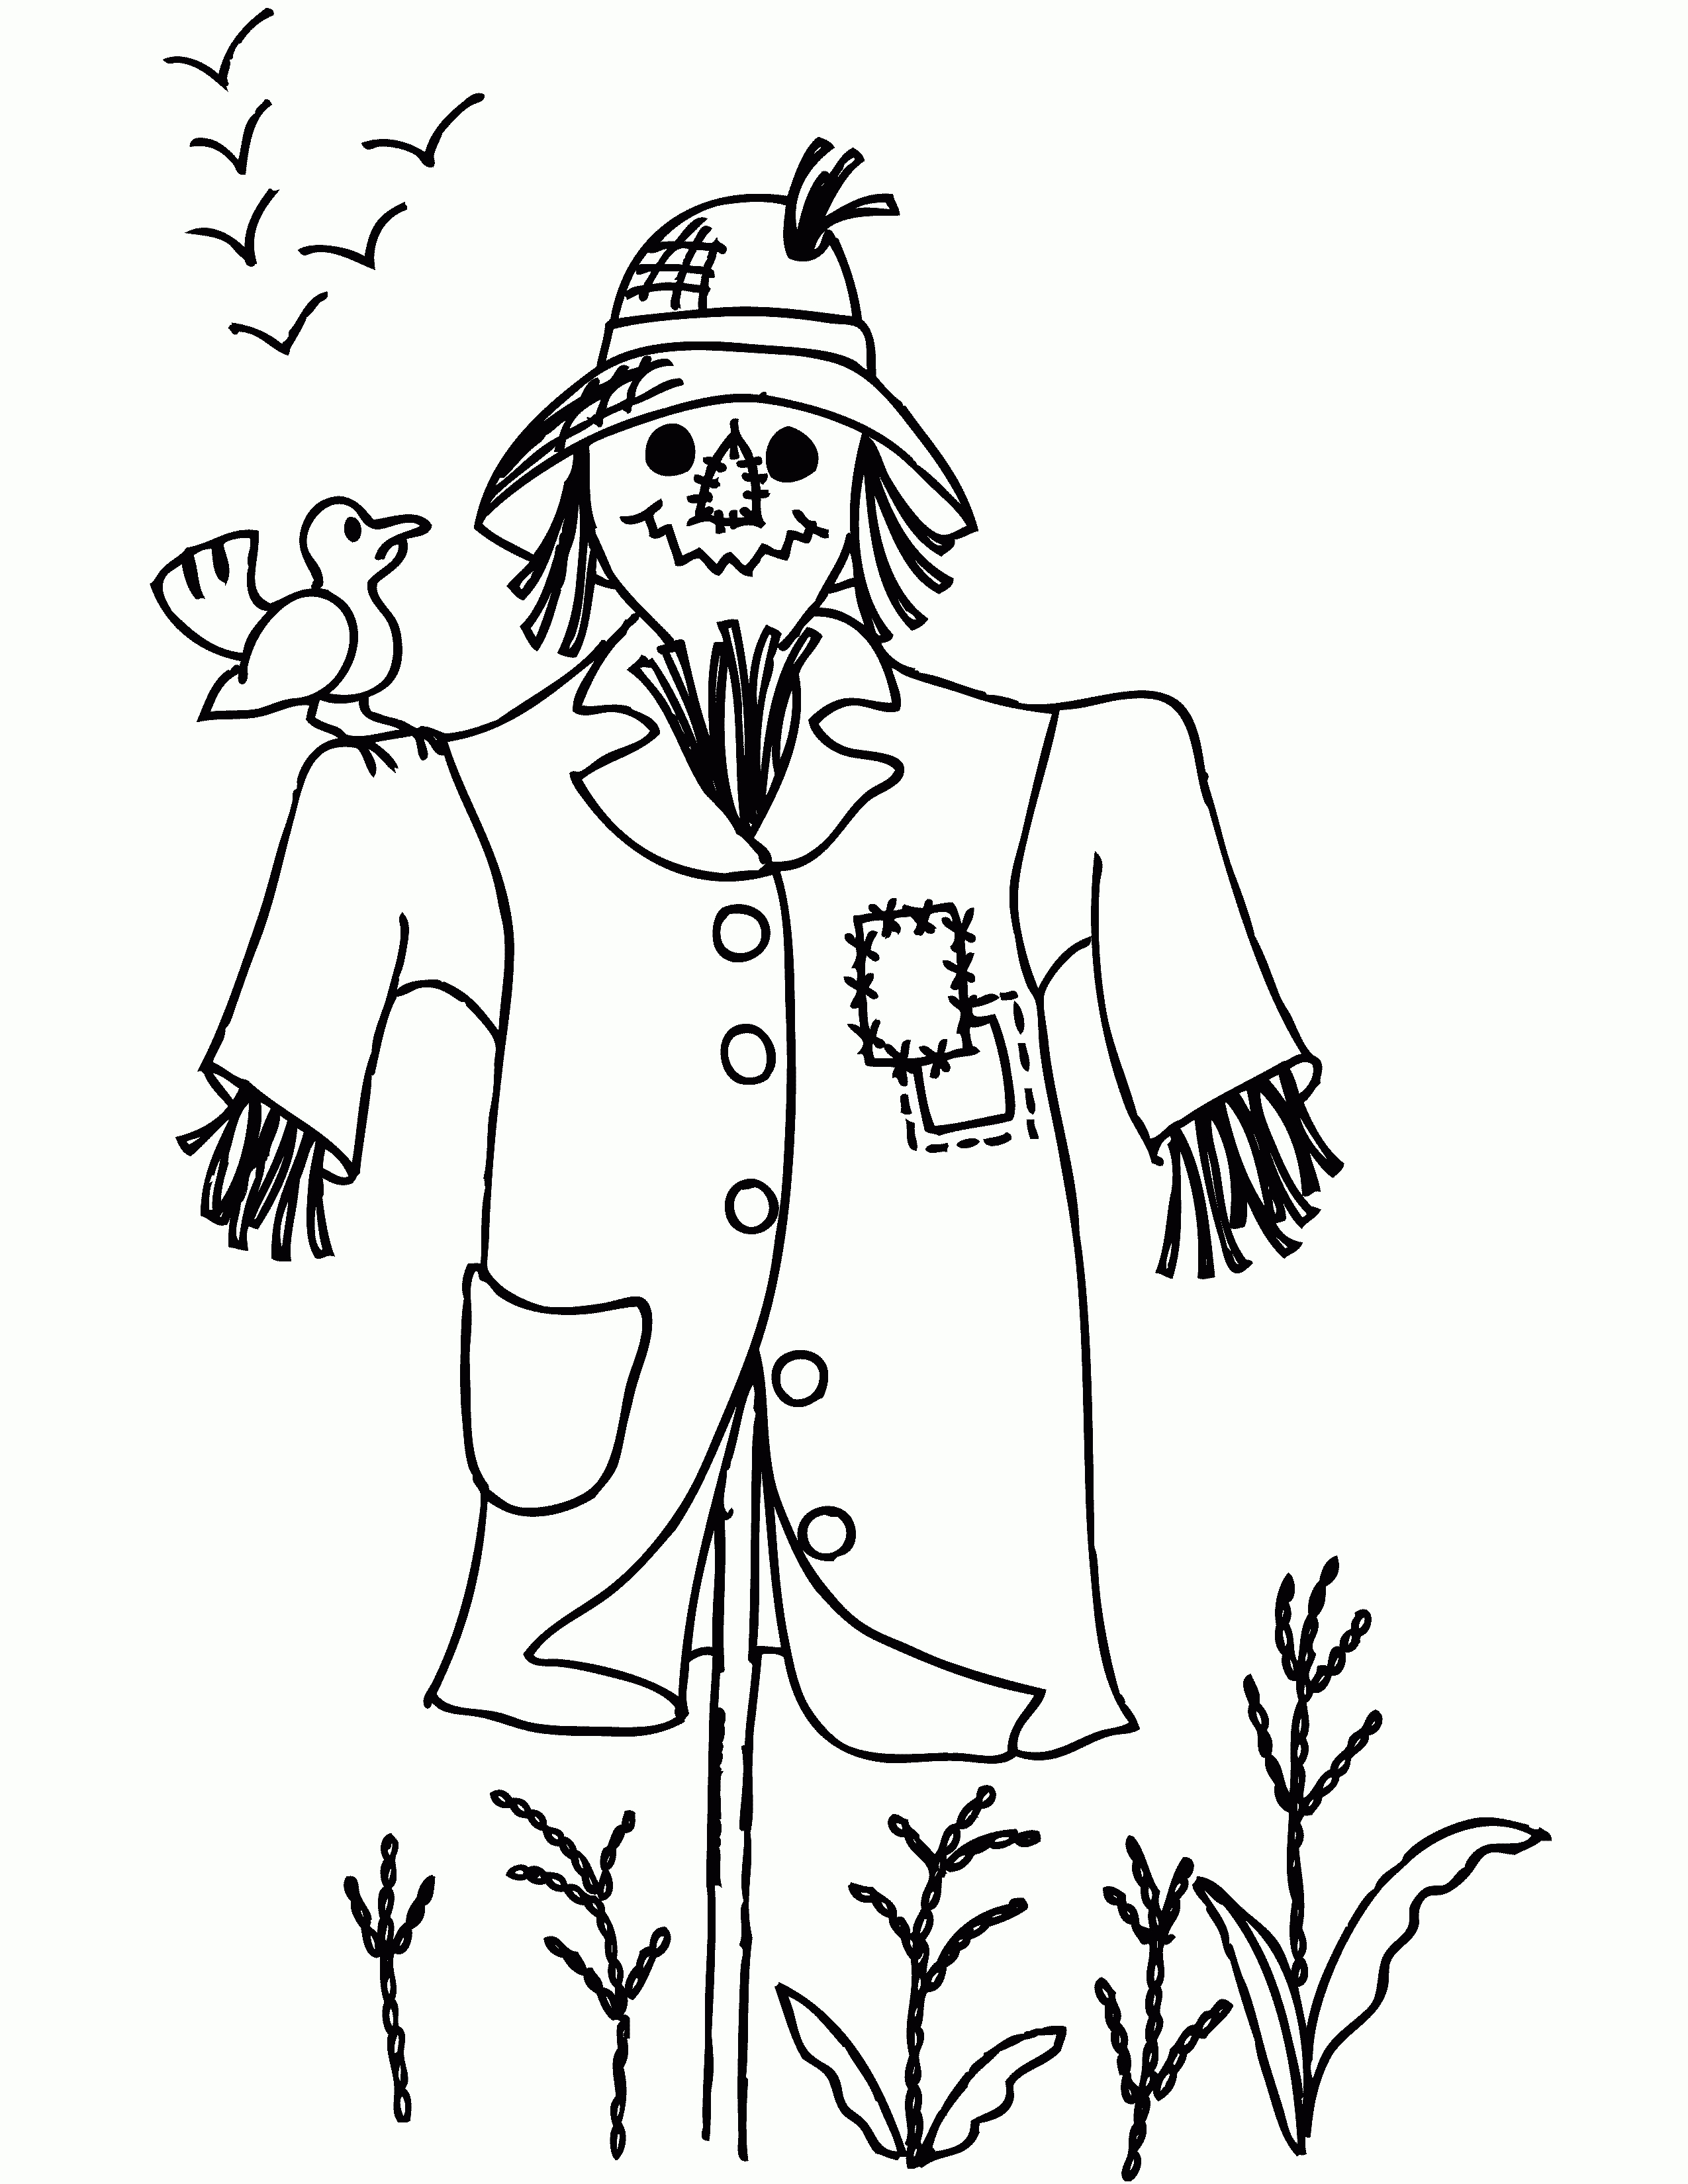 Free Printable Scarecrow Coloring Pages For Kids | Clip Art - Free Scarecrow Template Printable